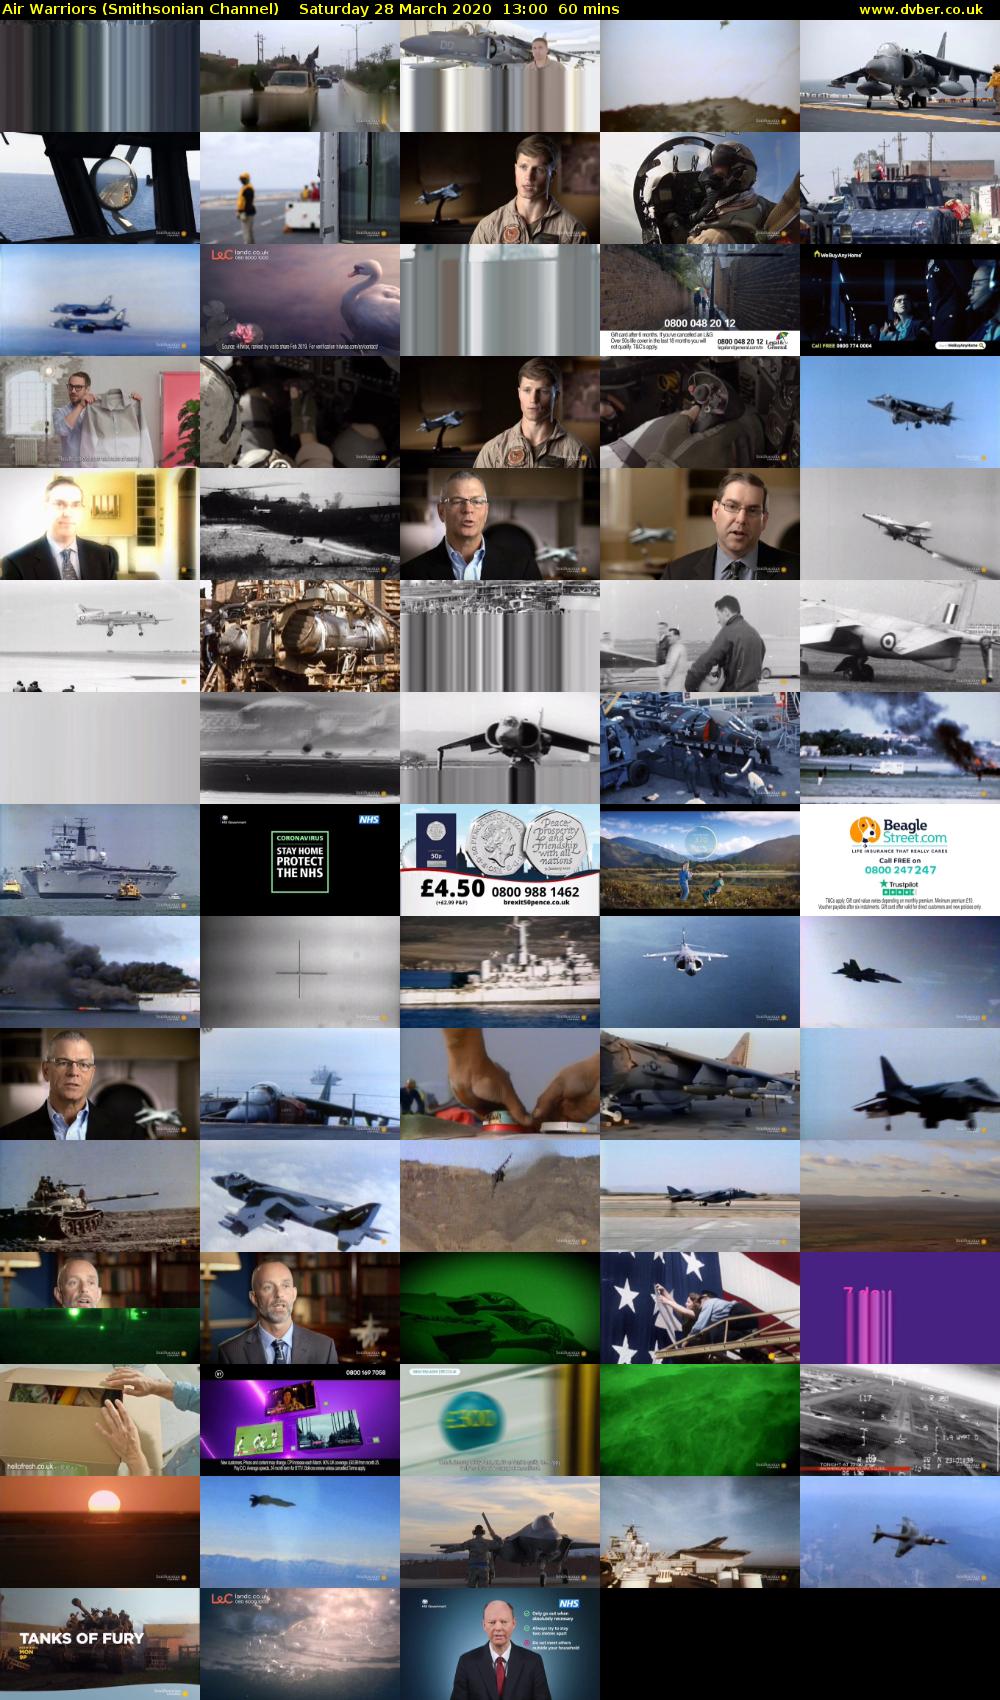 Air Warriors (Smithsonian Channel) Saturday 28 March 2020 13:00 - 14:00